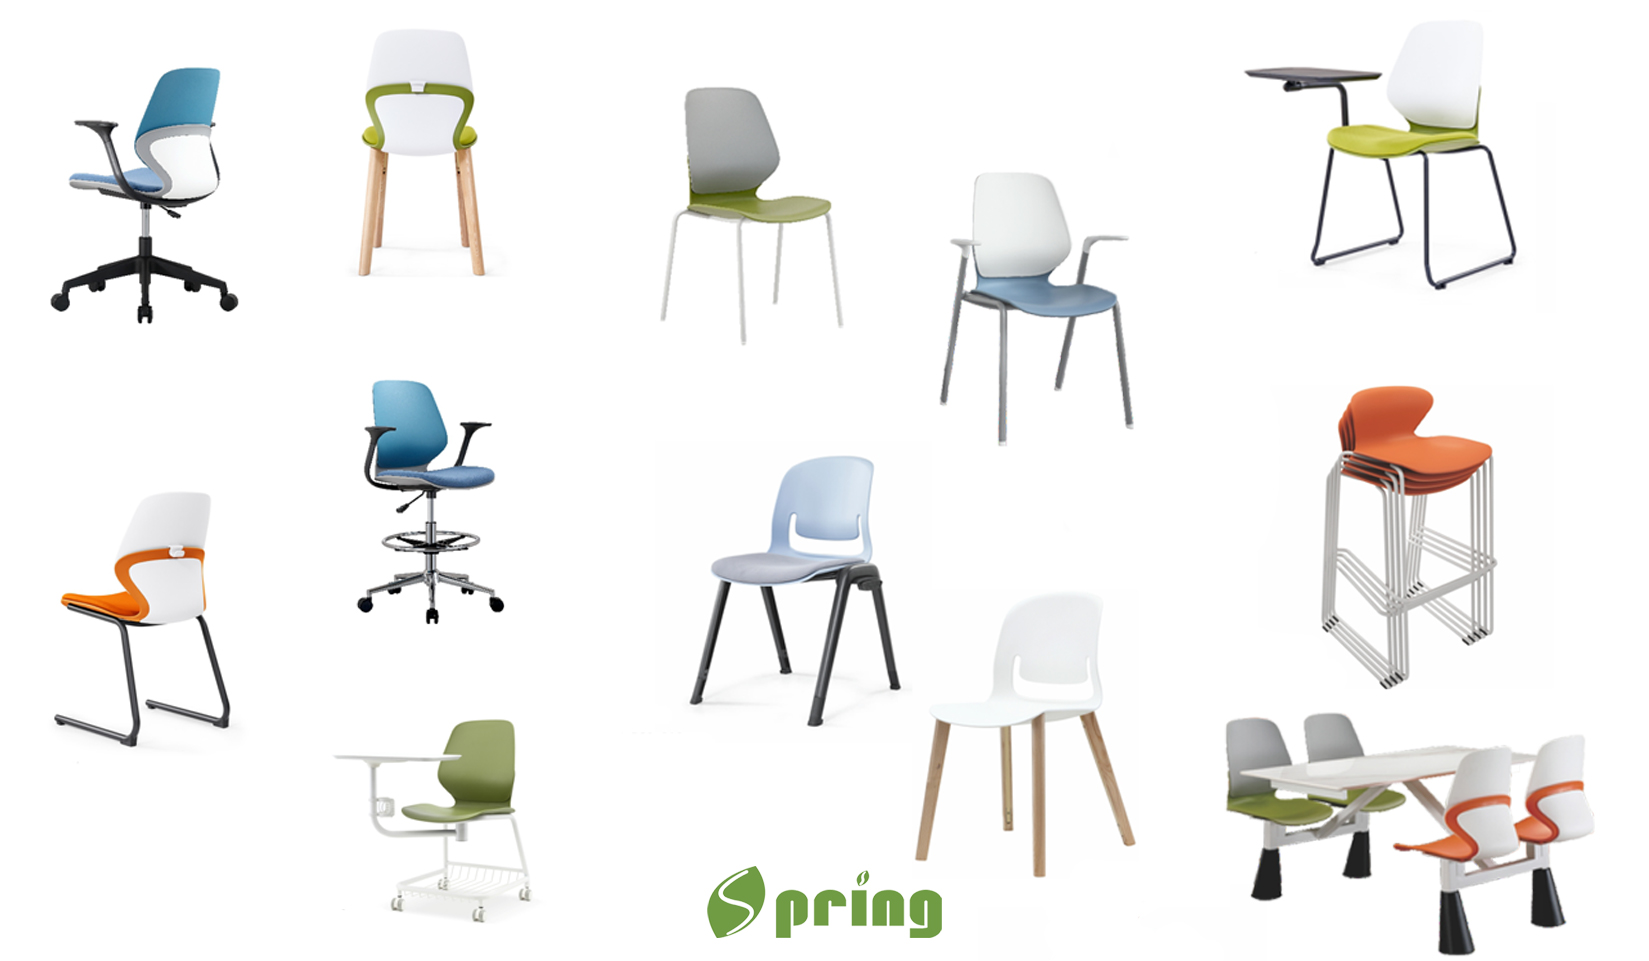 Exciting News from Spring Furniture: Introducing Our Sleek and Modern Line of Training Chairs!